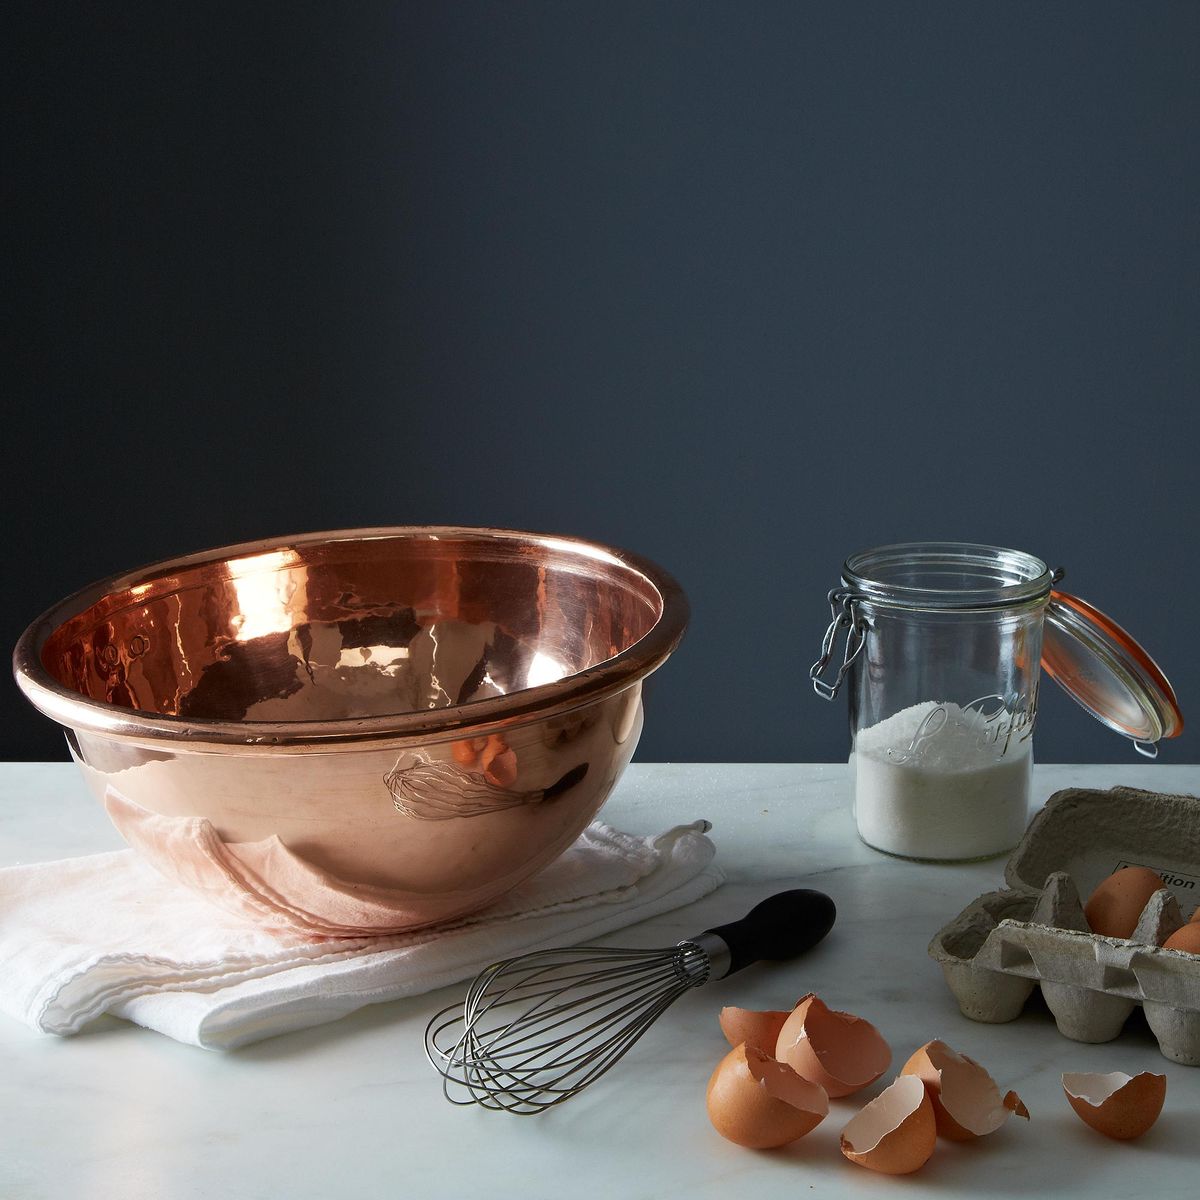 How to Clean And Polishing Copper Cookware - Foodal